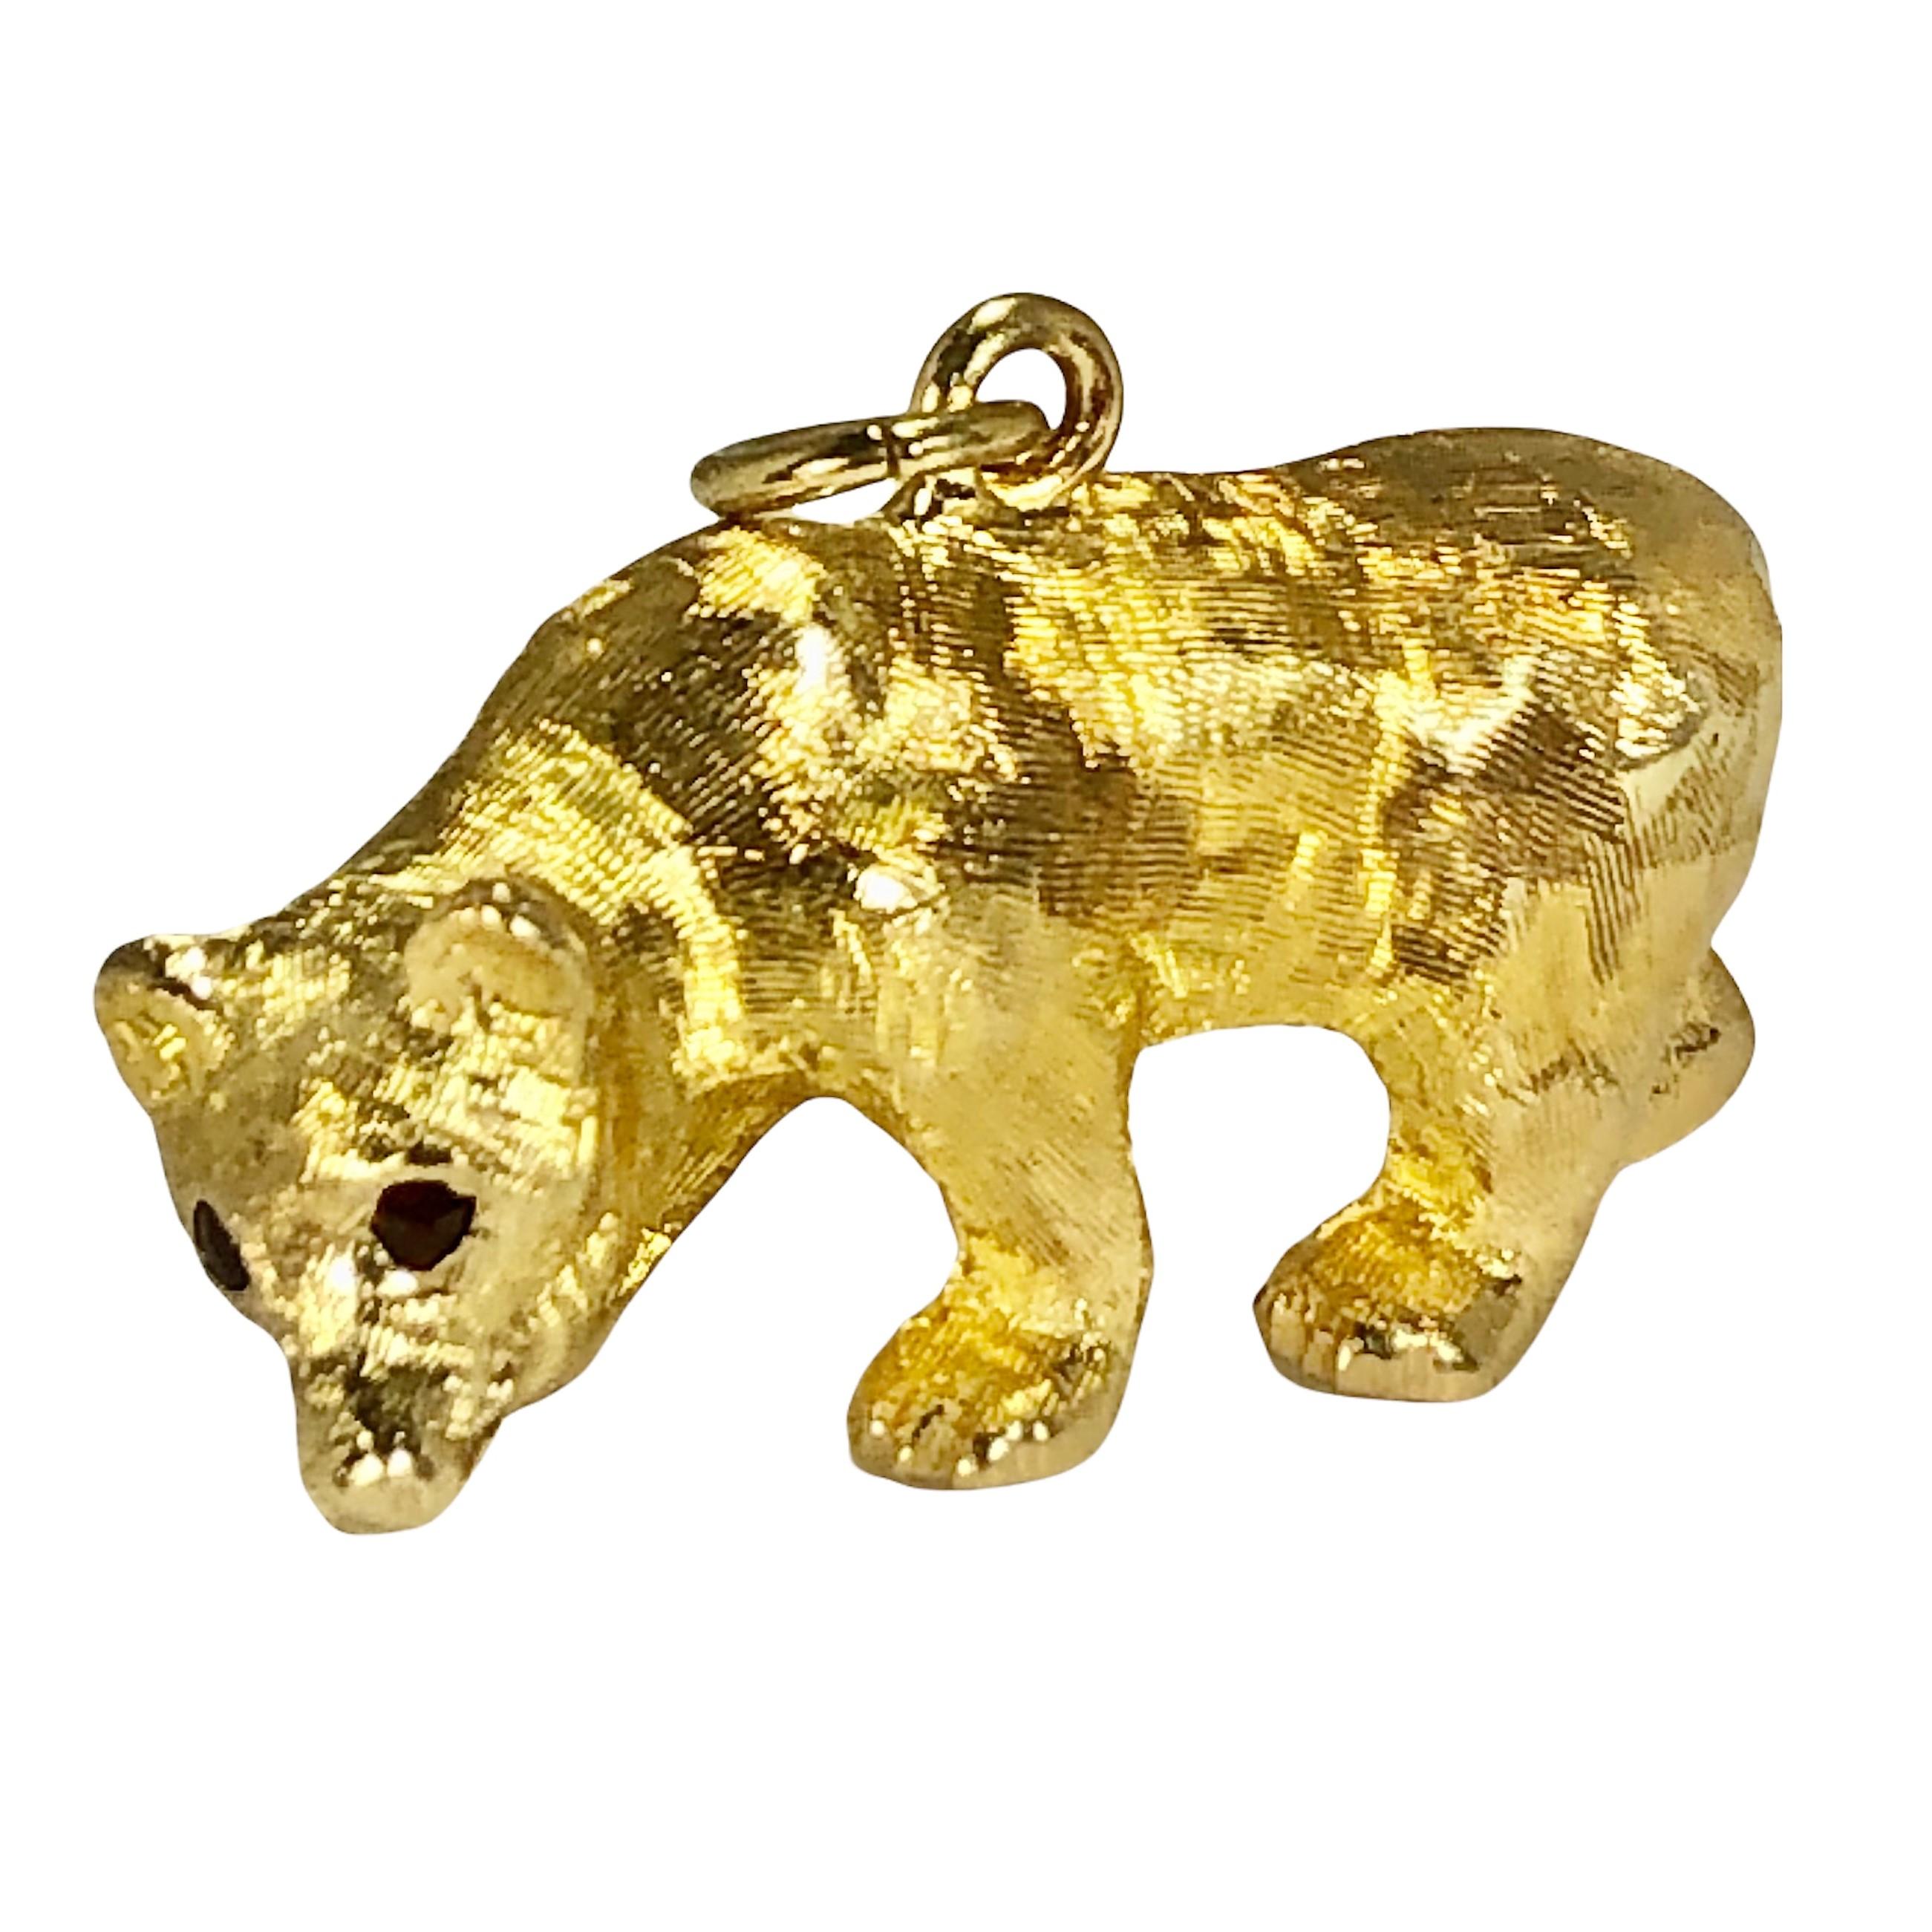 This extremely lifelike bear is fabricated from 14k gold and has a very rich 24k wash over it's entire surface. With a shimmering Florentine finish and red garnet eyes, it is truly a unique work of art. Measuring a full 1 1/2 inches in length by 3/4